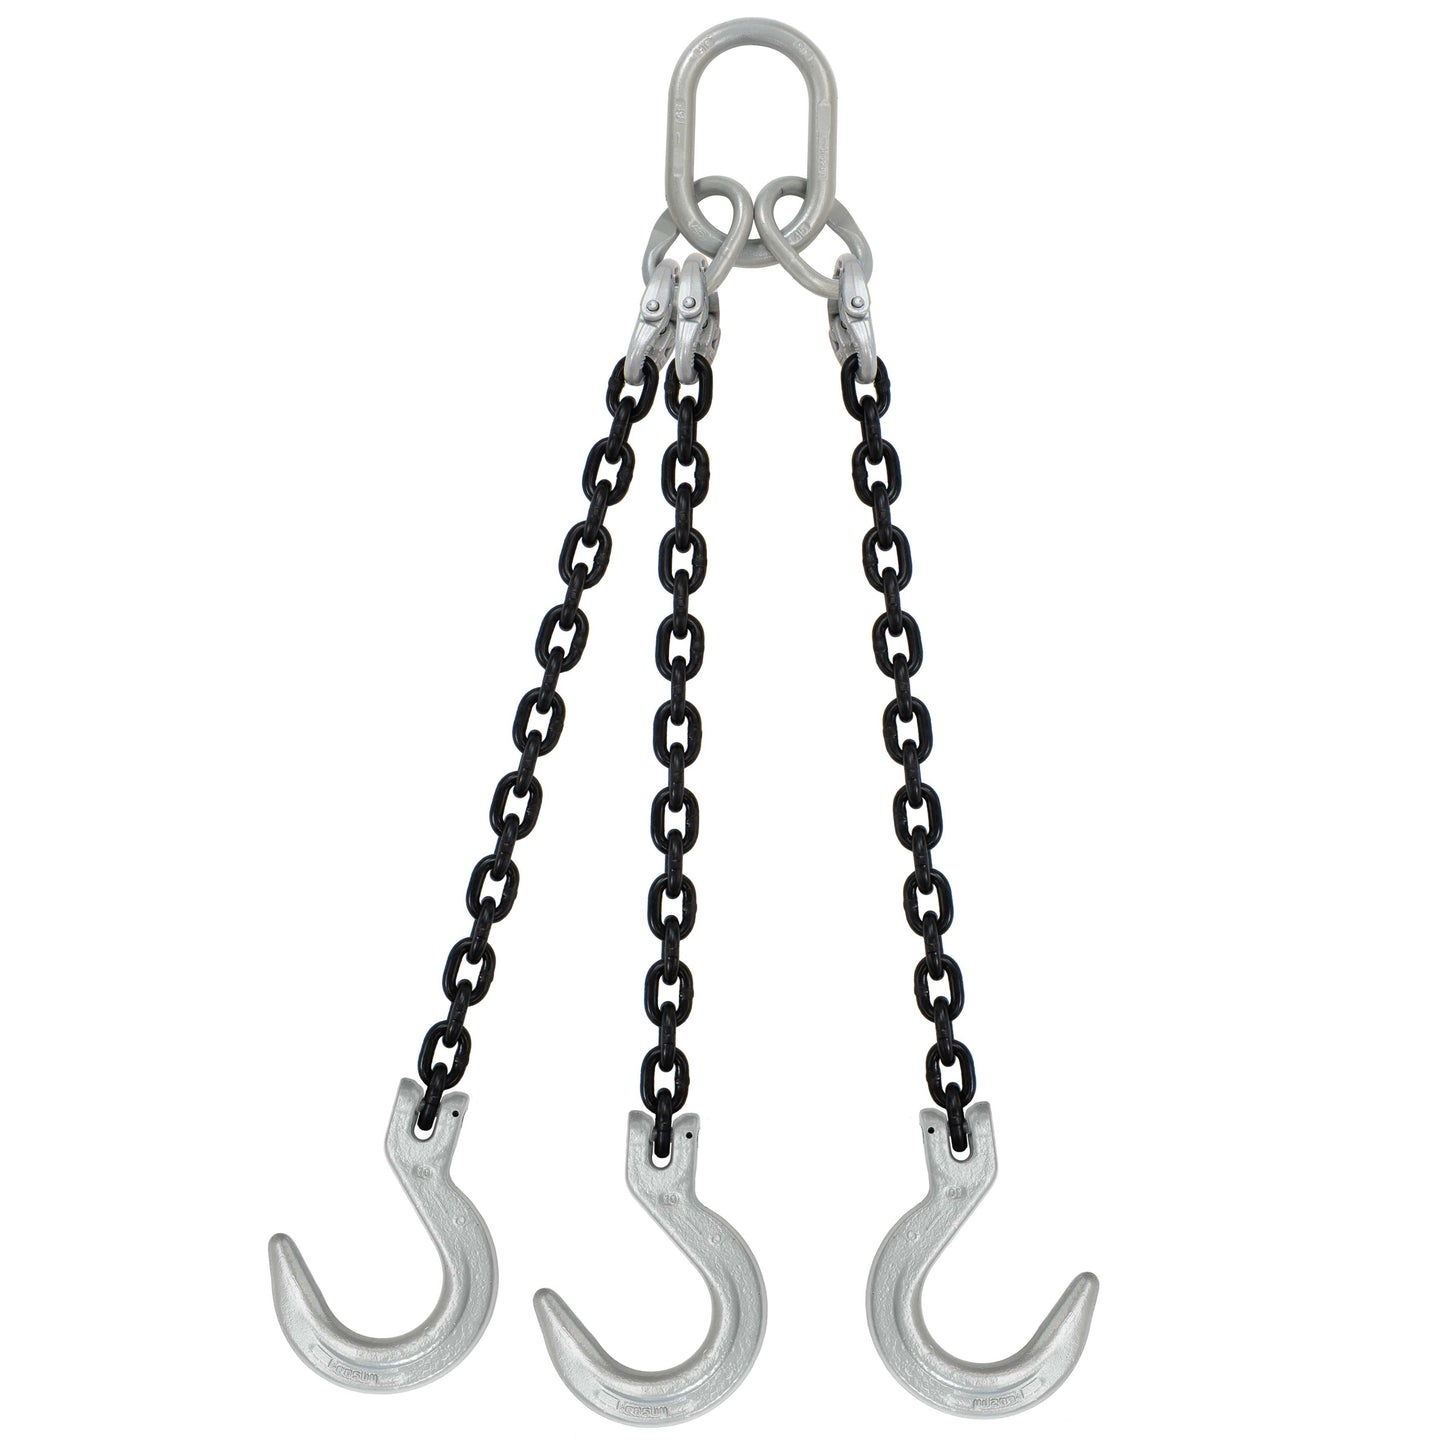 12 inch x 8 foot Domestic 3 Leg Chain Sling w Crosby Foundry Hooks Grade 100 image 1 of 2